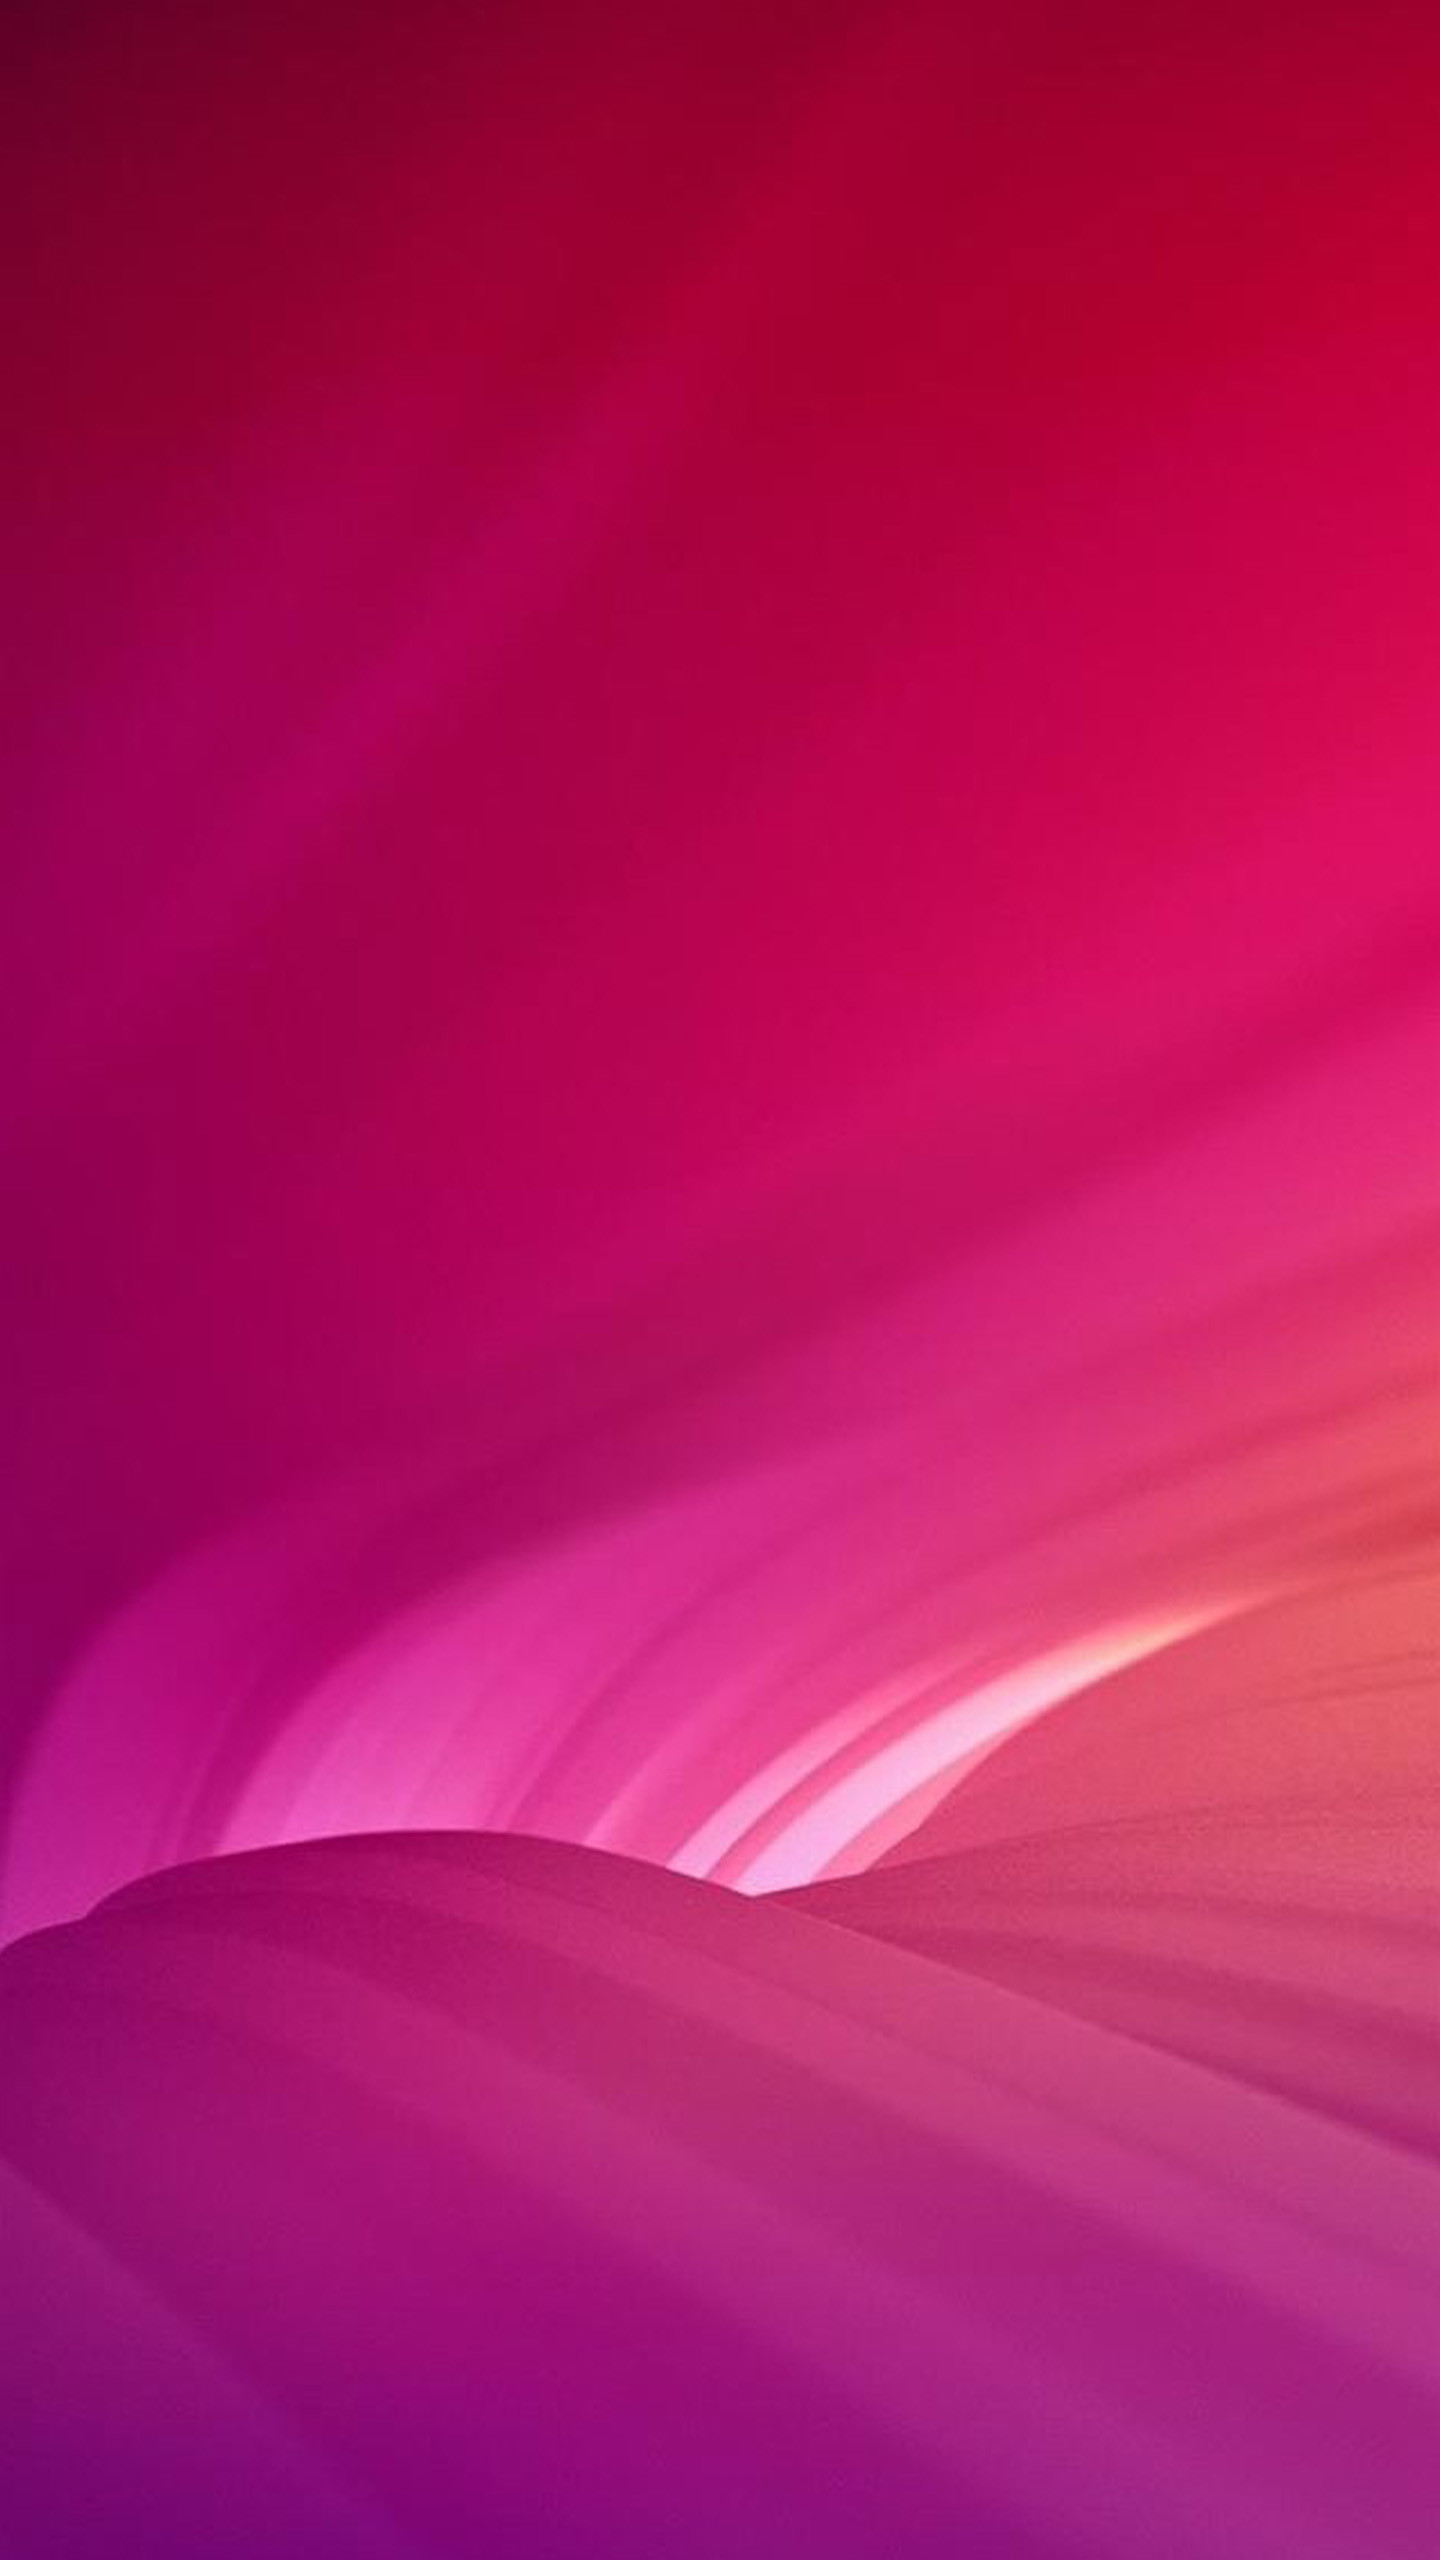 1440x2560 Abstract Samsung Galaxy Note 4 Wallpapers 291